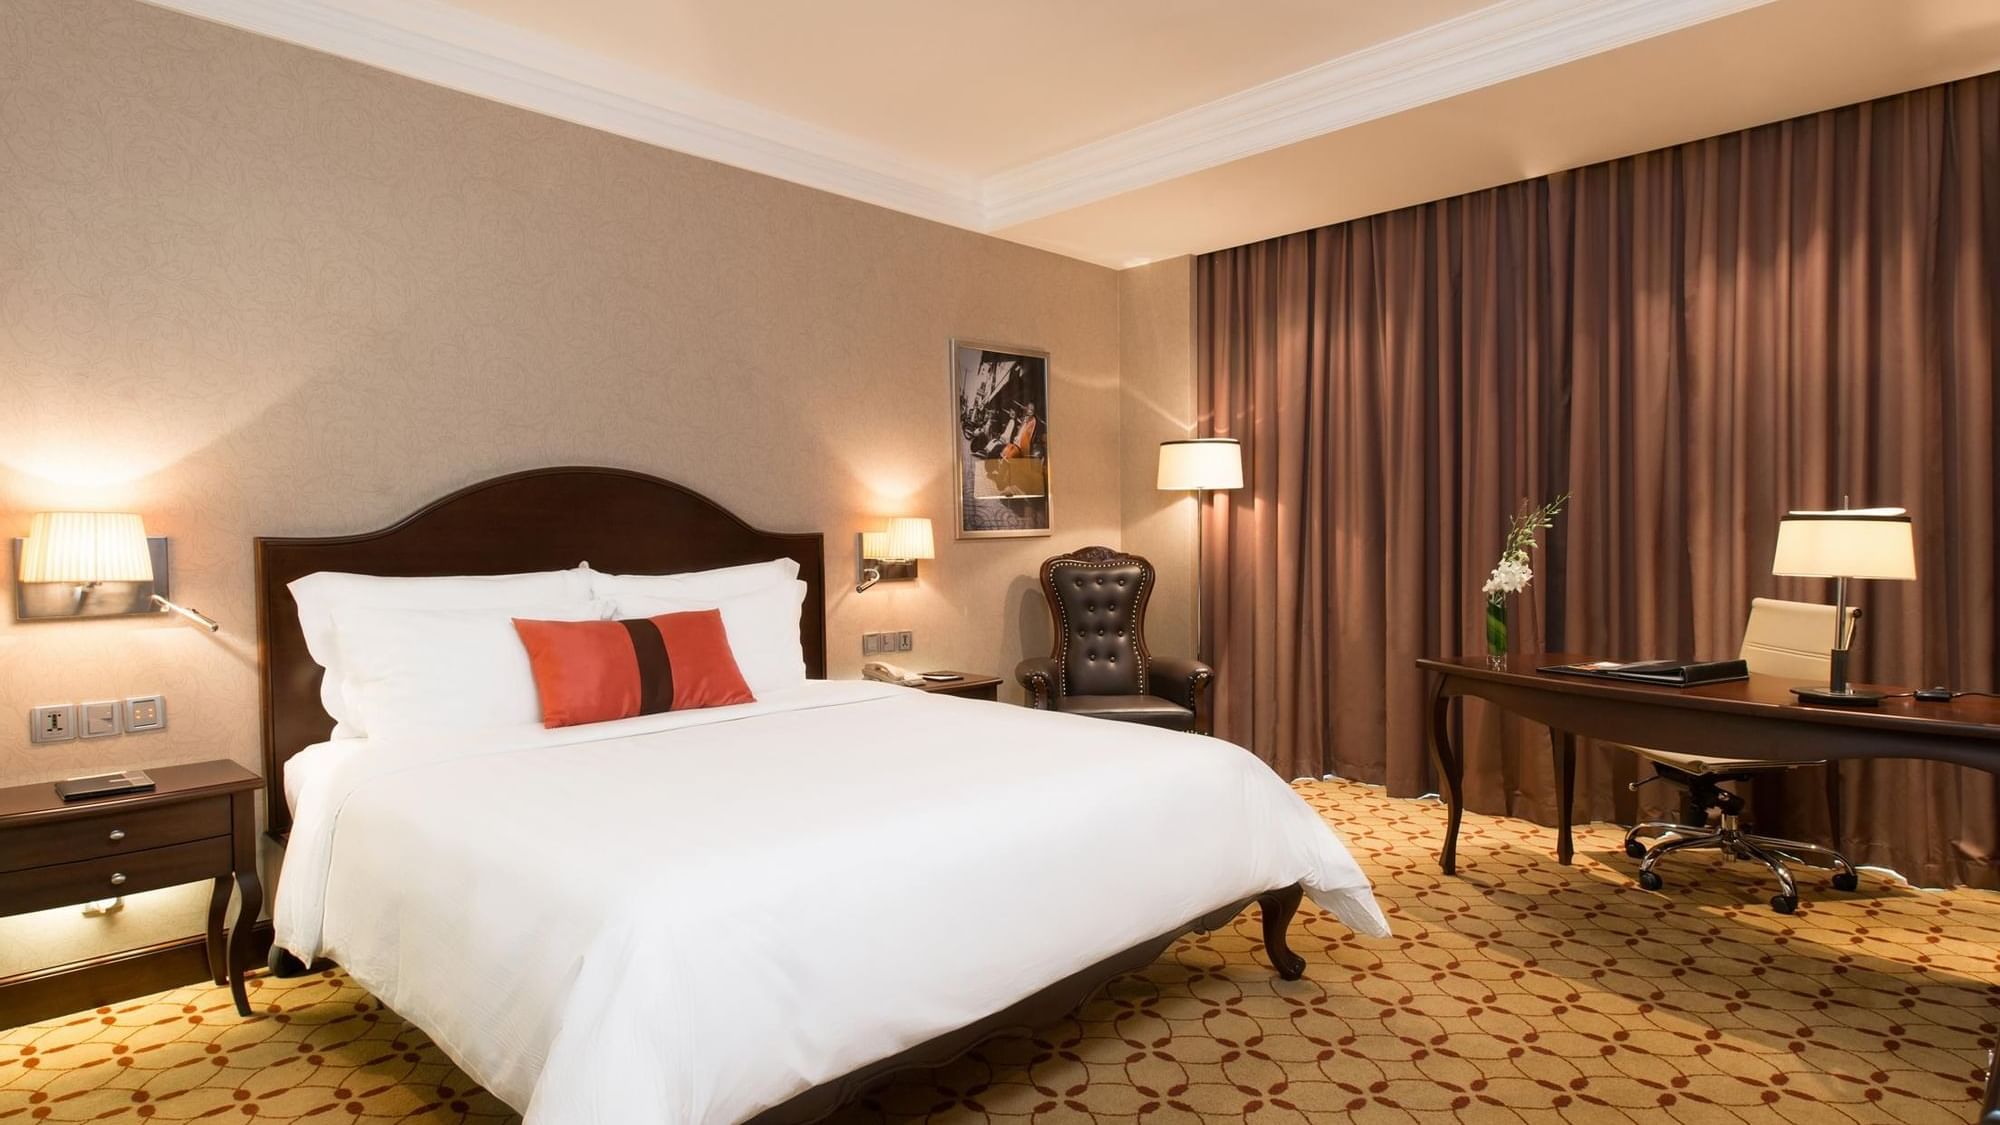 King Bed & furniture in Superior Rooms at Eastin Hotels